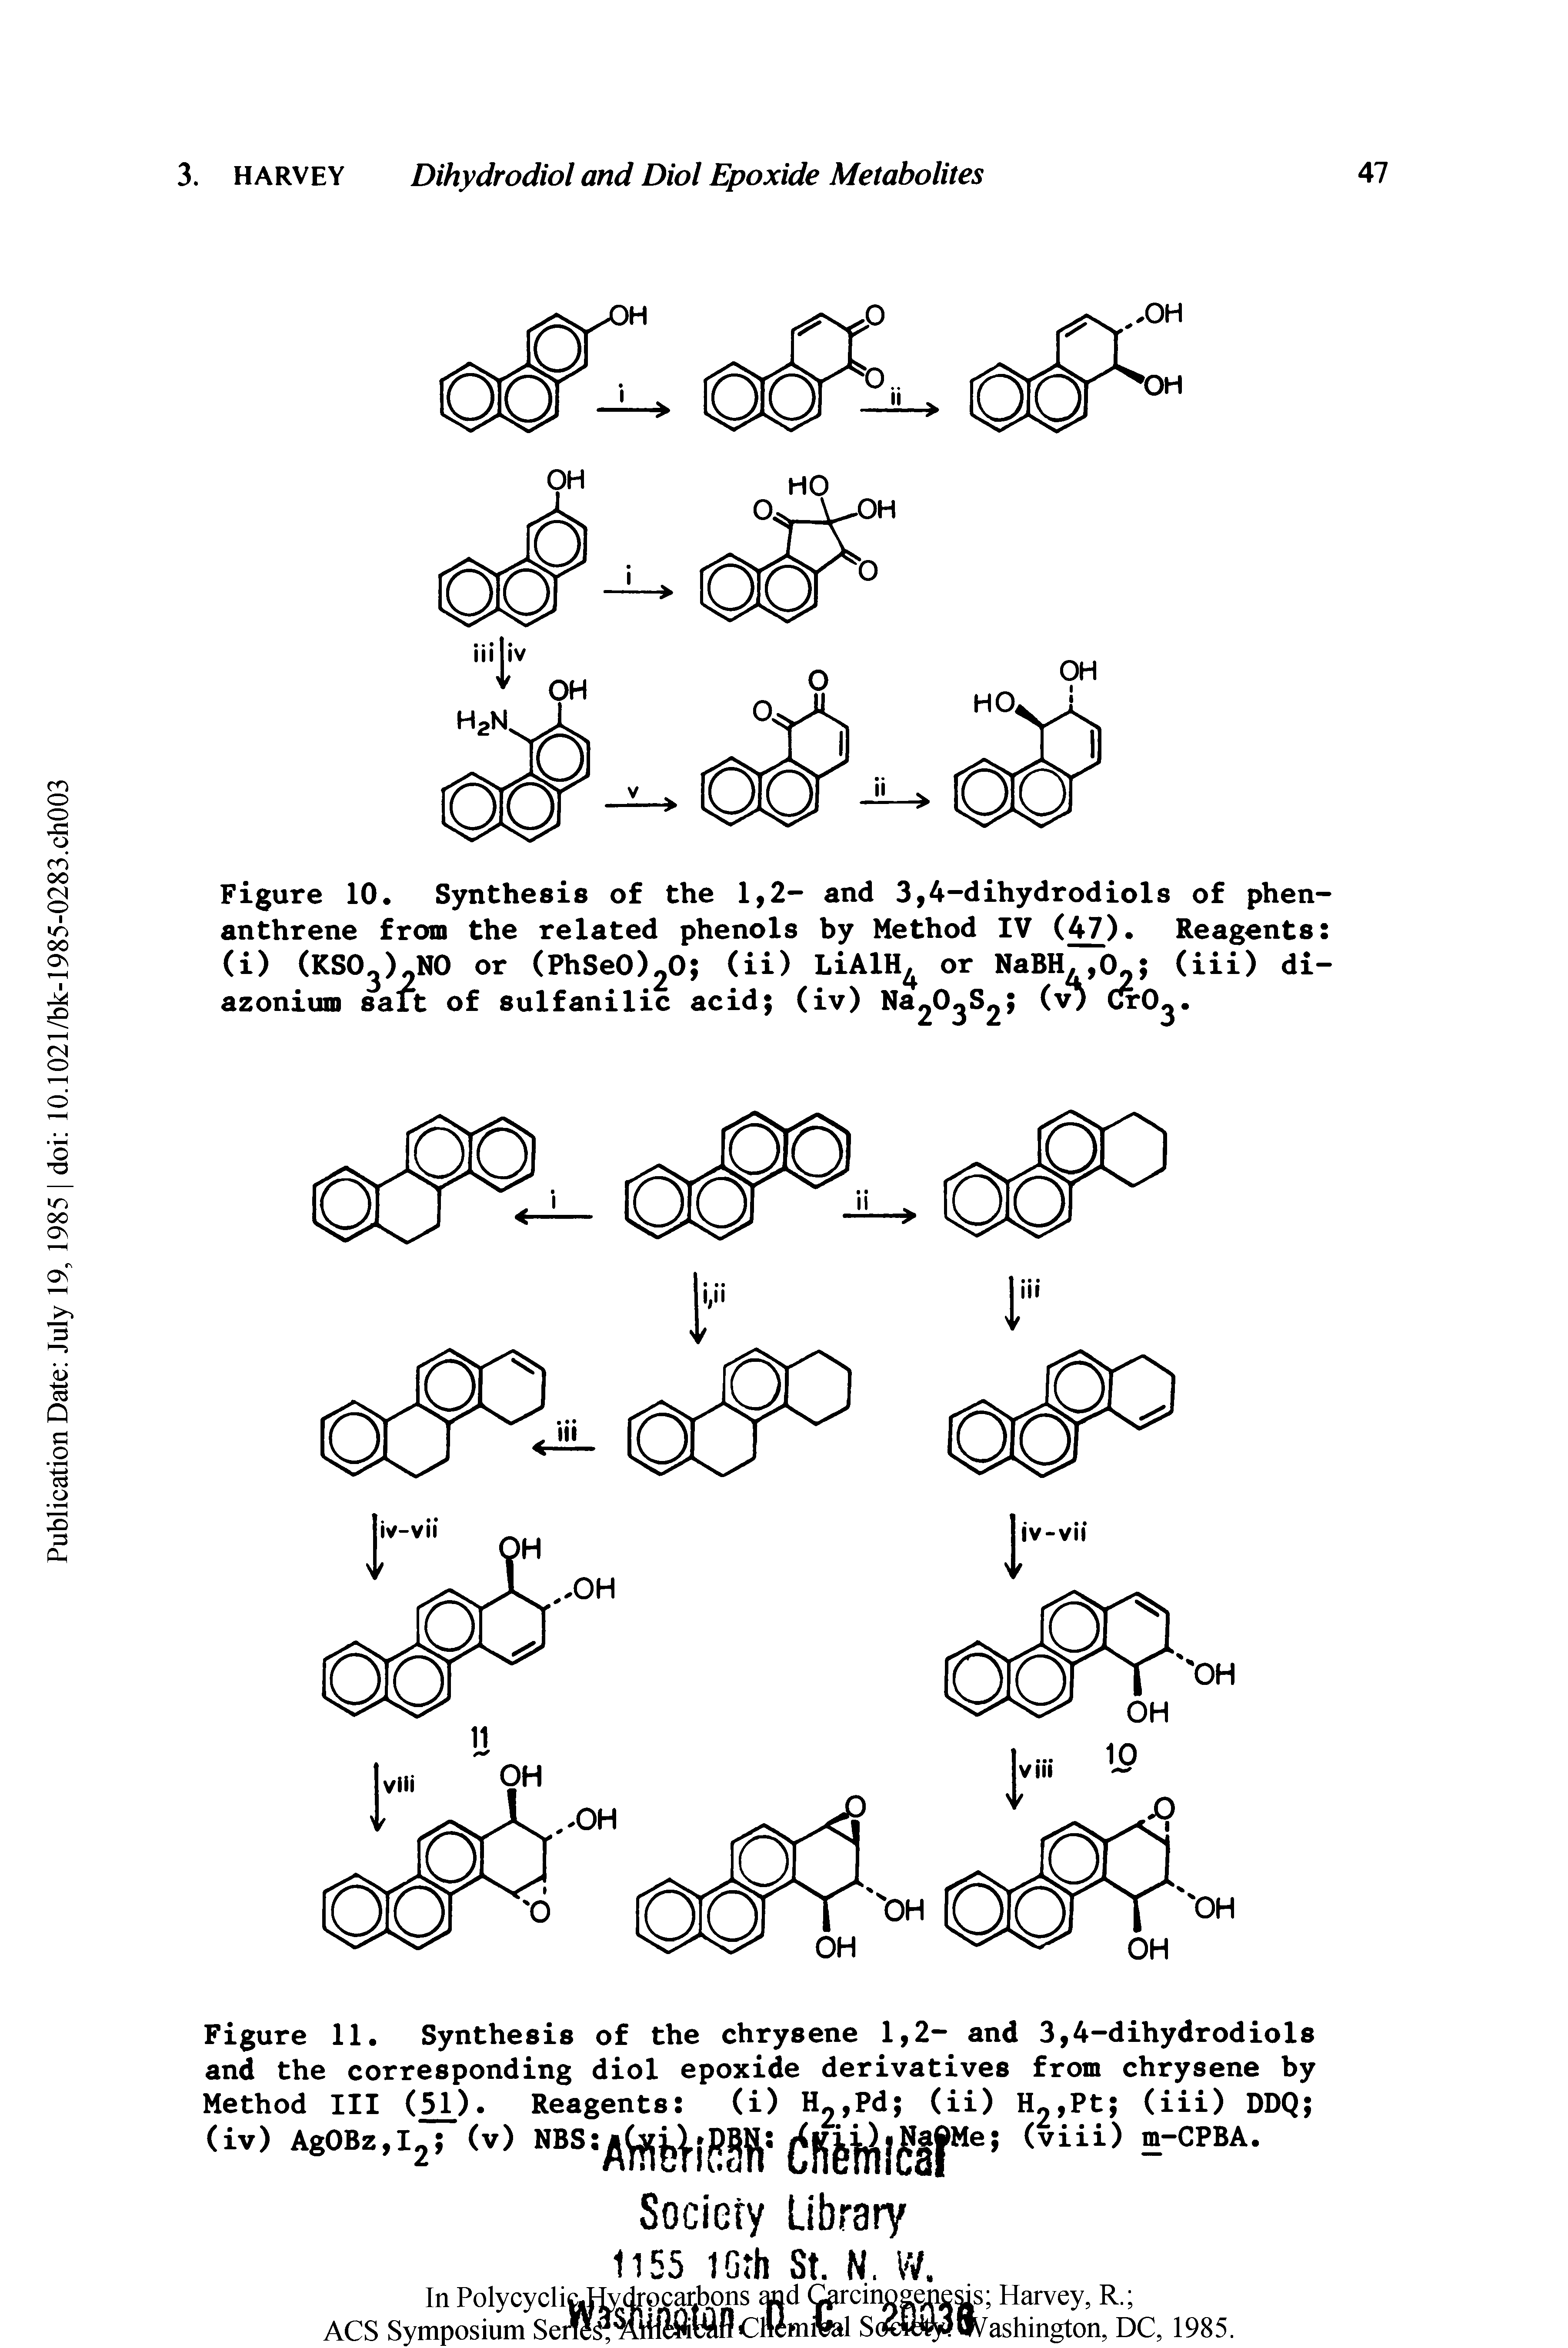 Figure 11. Synthesis of the chrysene 1,2- and 3,4-dihydrodiols and the corresponding diol epoxide derivatives from chrysene by Method III (50. Reagents (i) H2,Pd (ii) H2,Pt (iii) DDQ (iv) AgOBZ,I25 (v) NBS A. <ViU) 2 CPBA ...